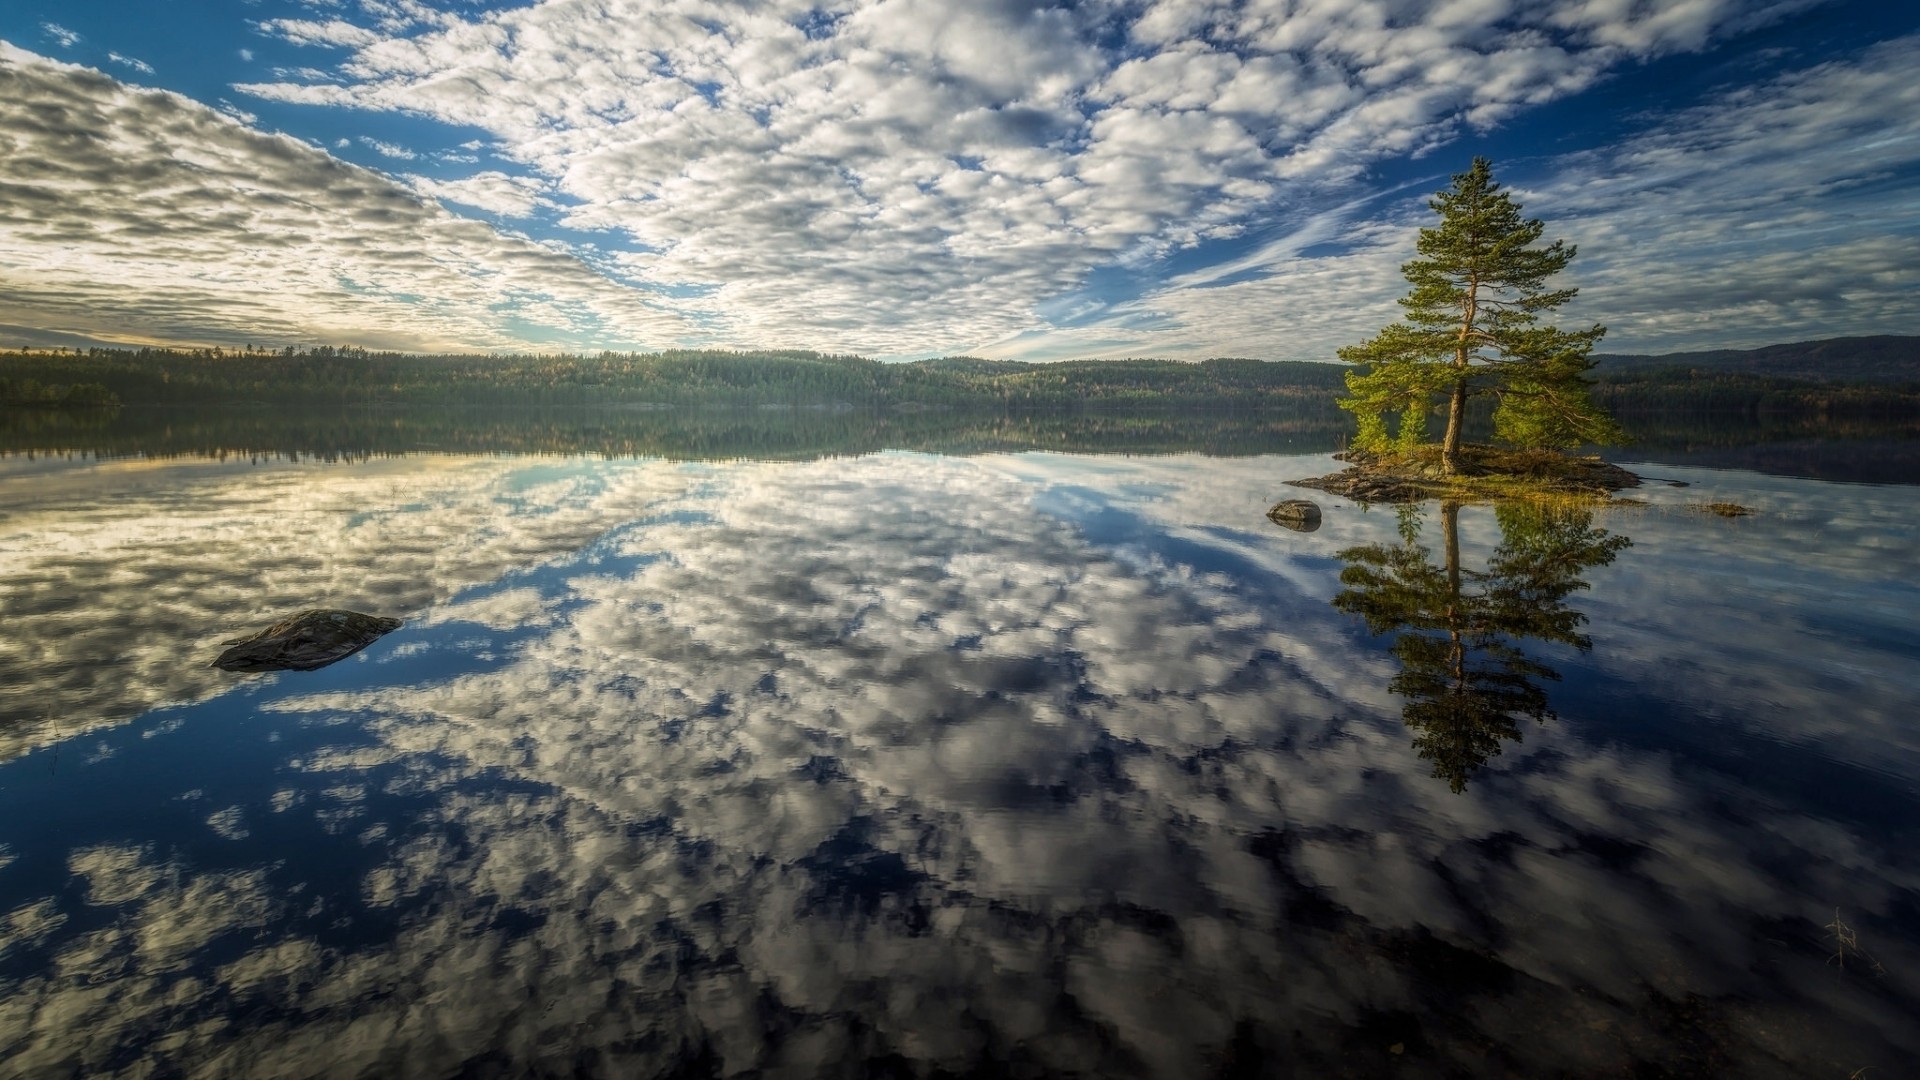 General 1920x1080 nature landscape trees water reflection forest clouds lake hills horizon rocks island